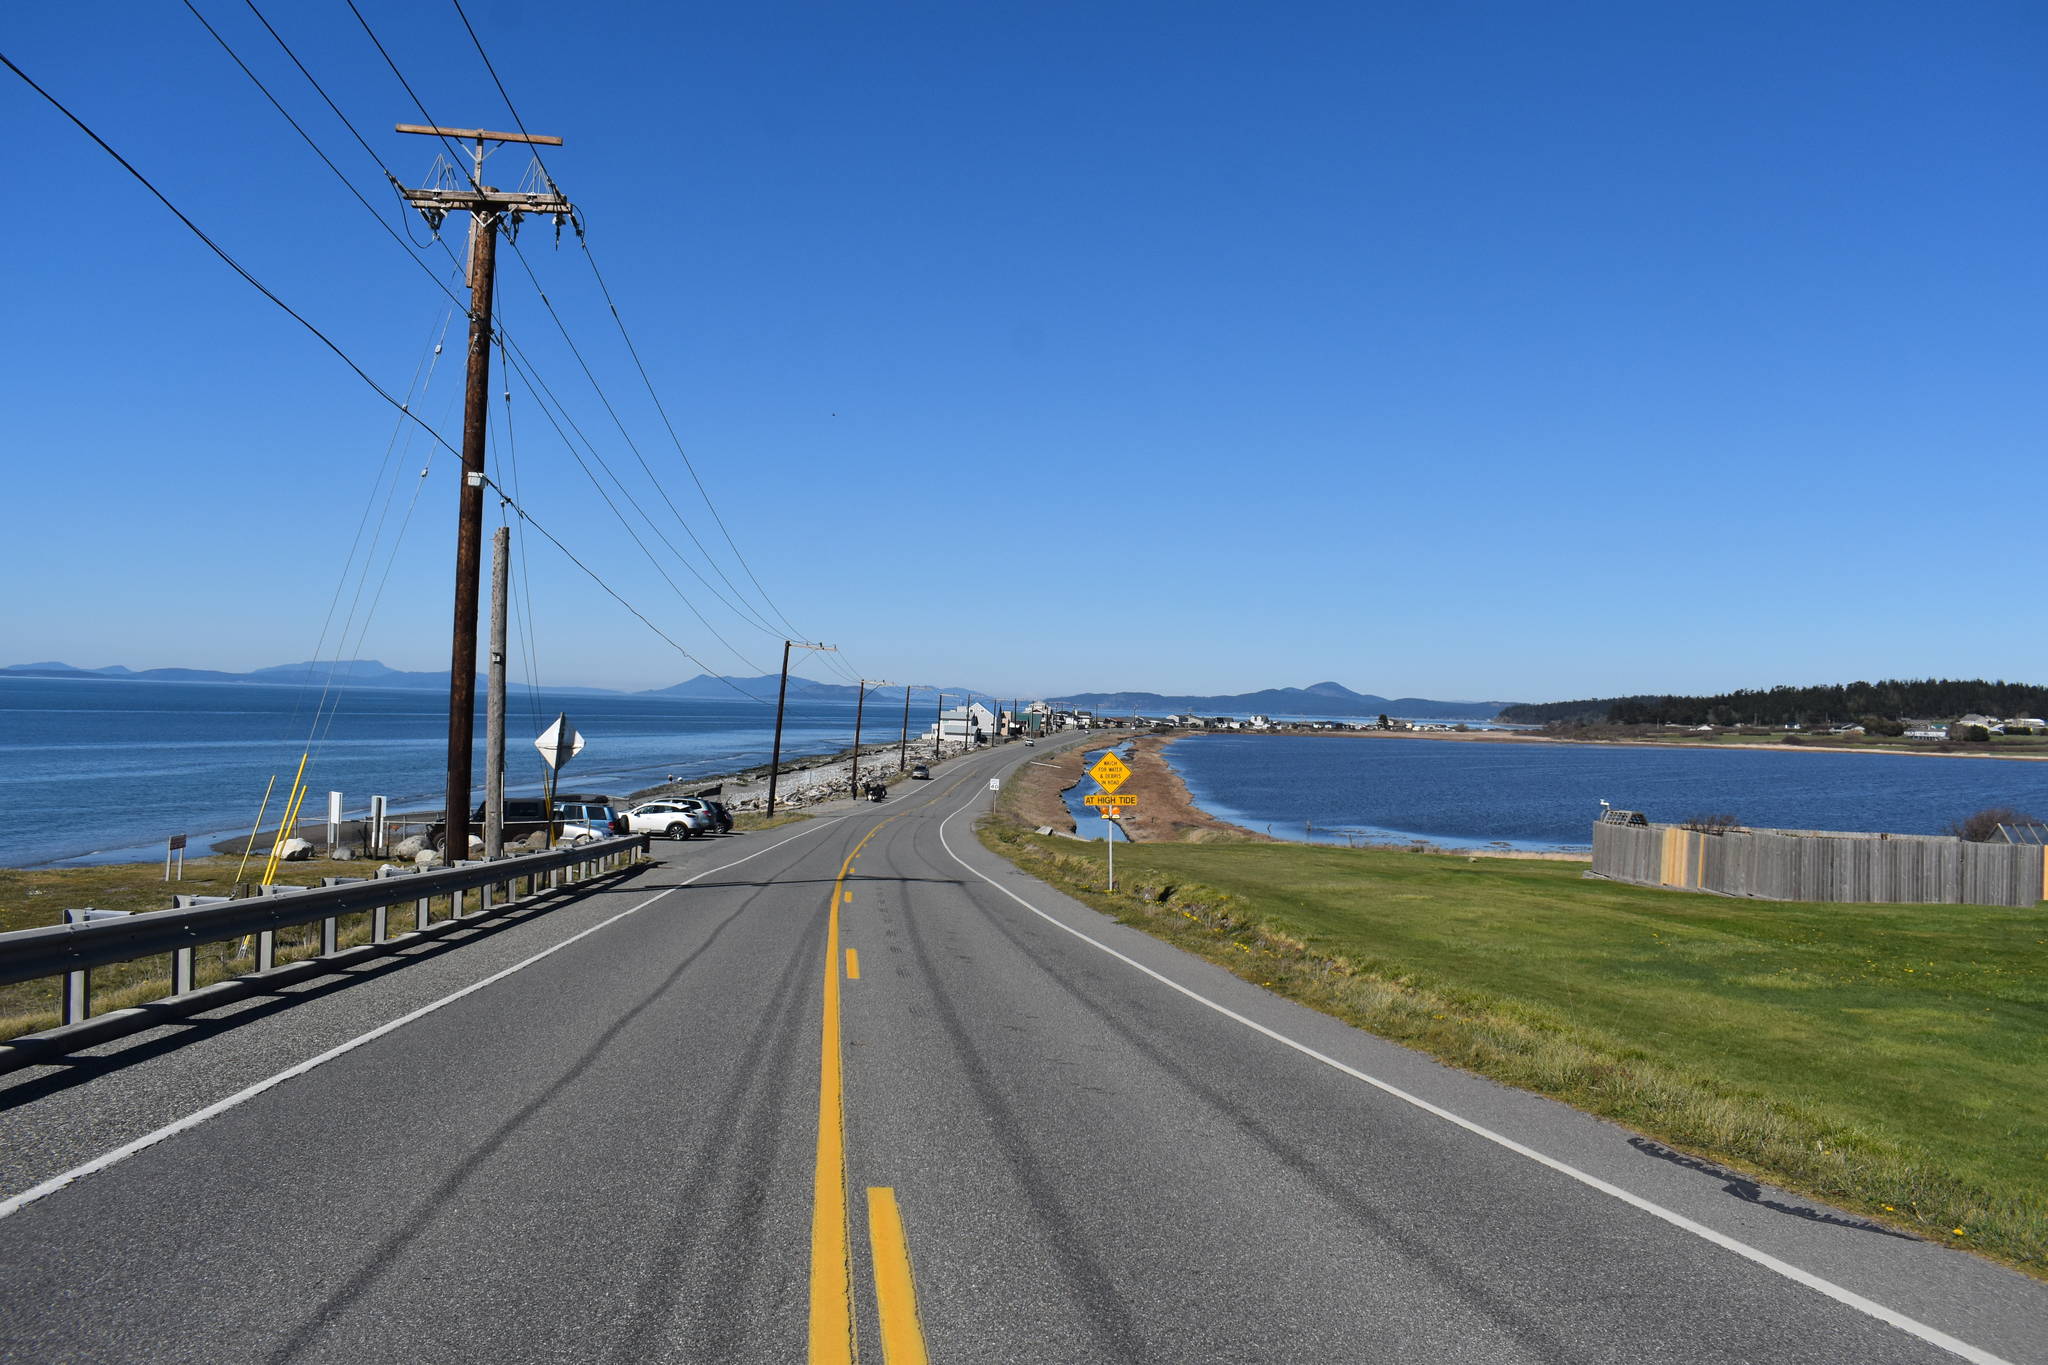 The route of the Whidbey 1/2 will take runners down West Beach Road where they will be greeted by views of the Pacific Ocean and snow-capped mountains on Sunday, April 25. (Photo by Emily Gilbert/Whidbey News-Times)